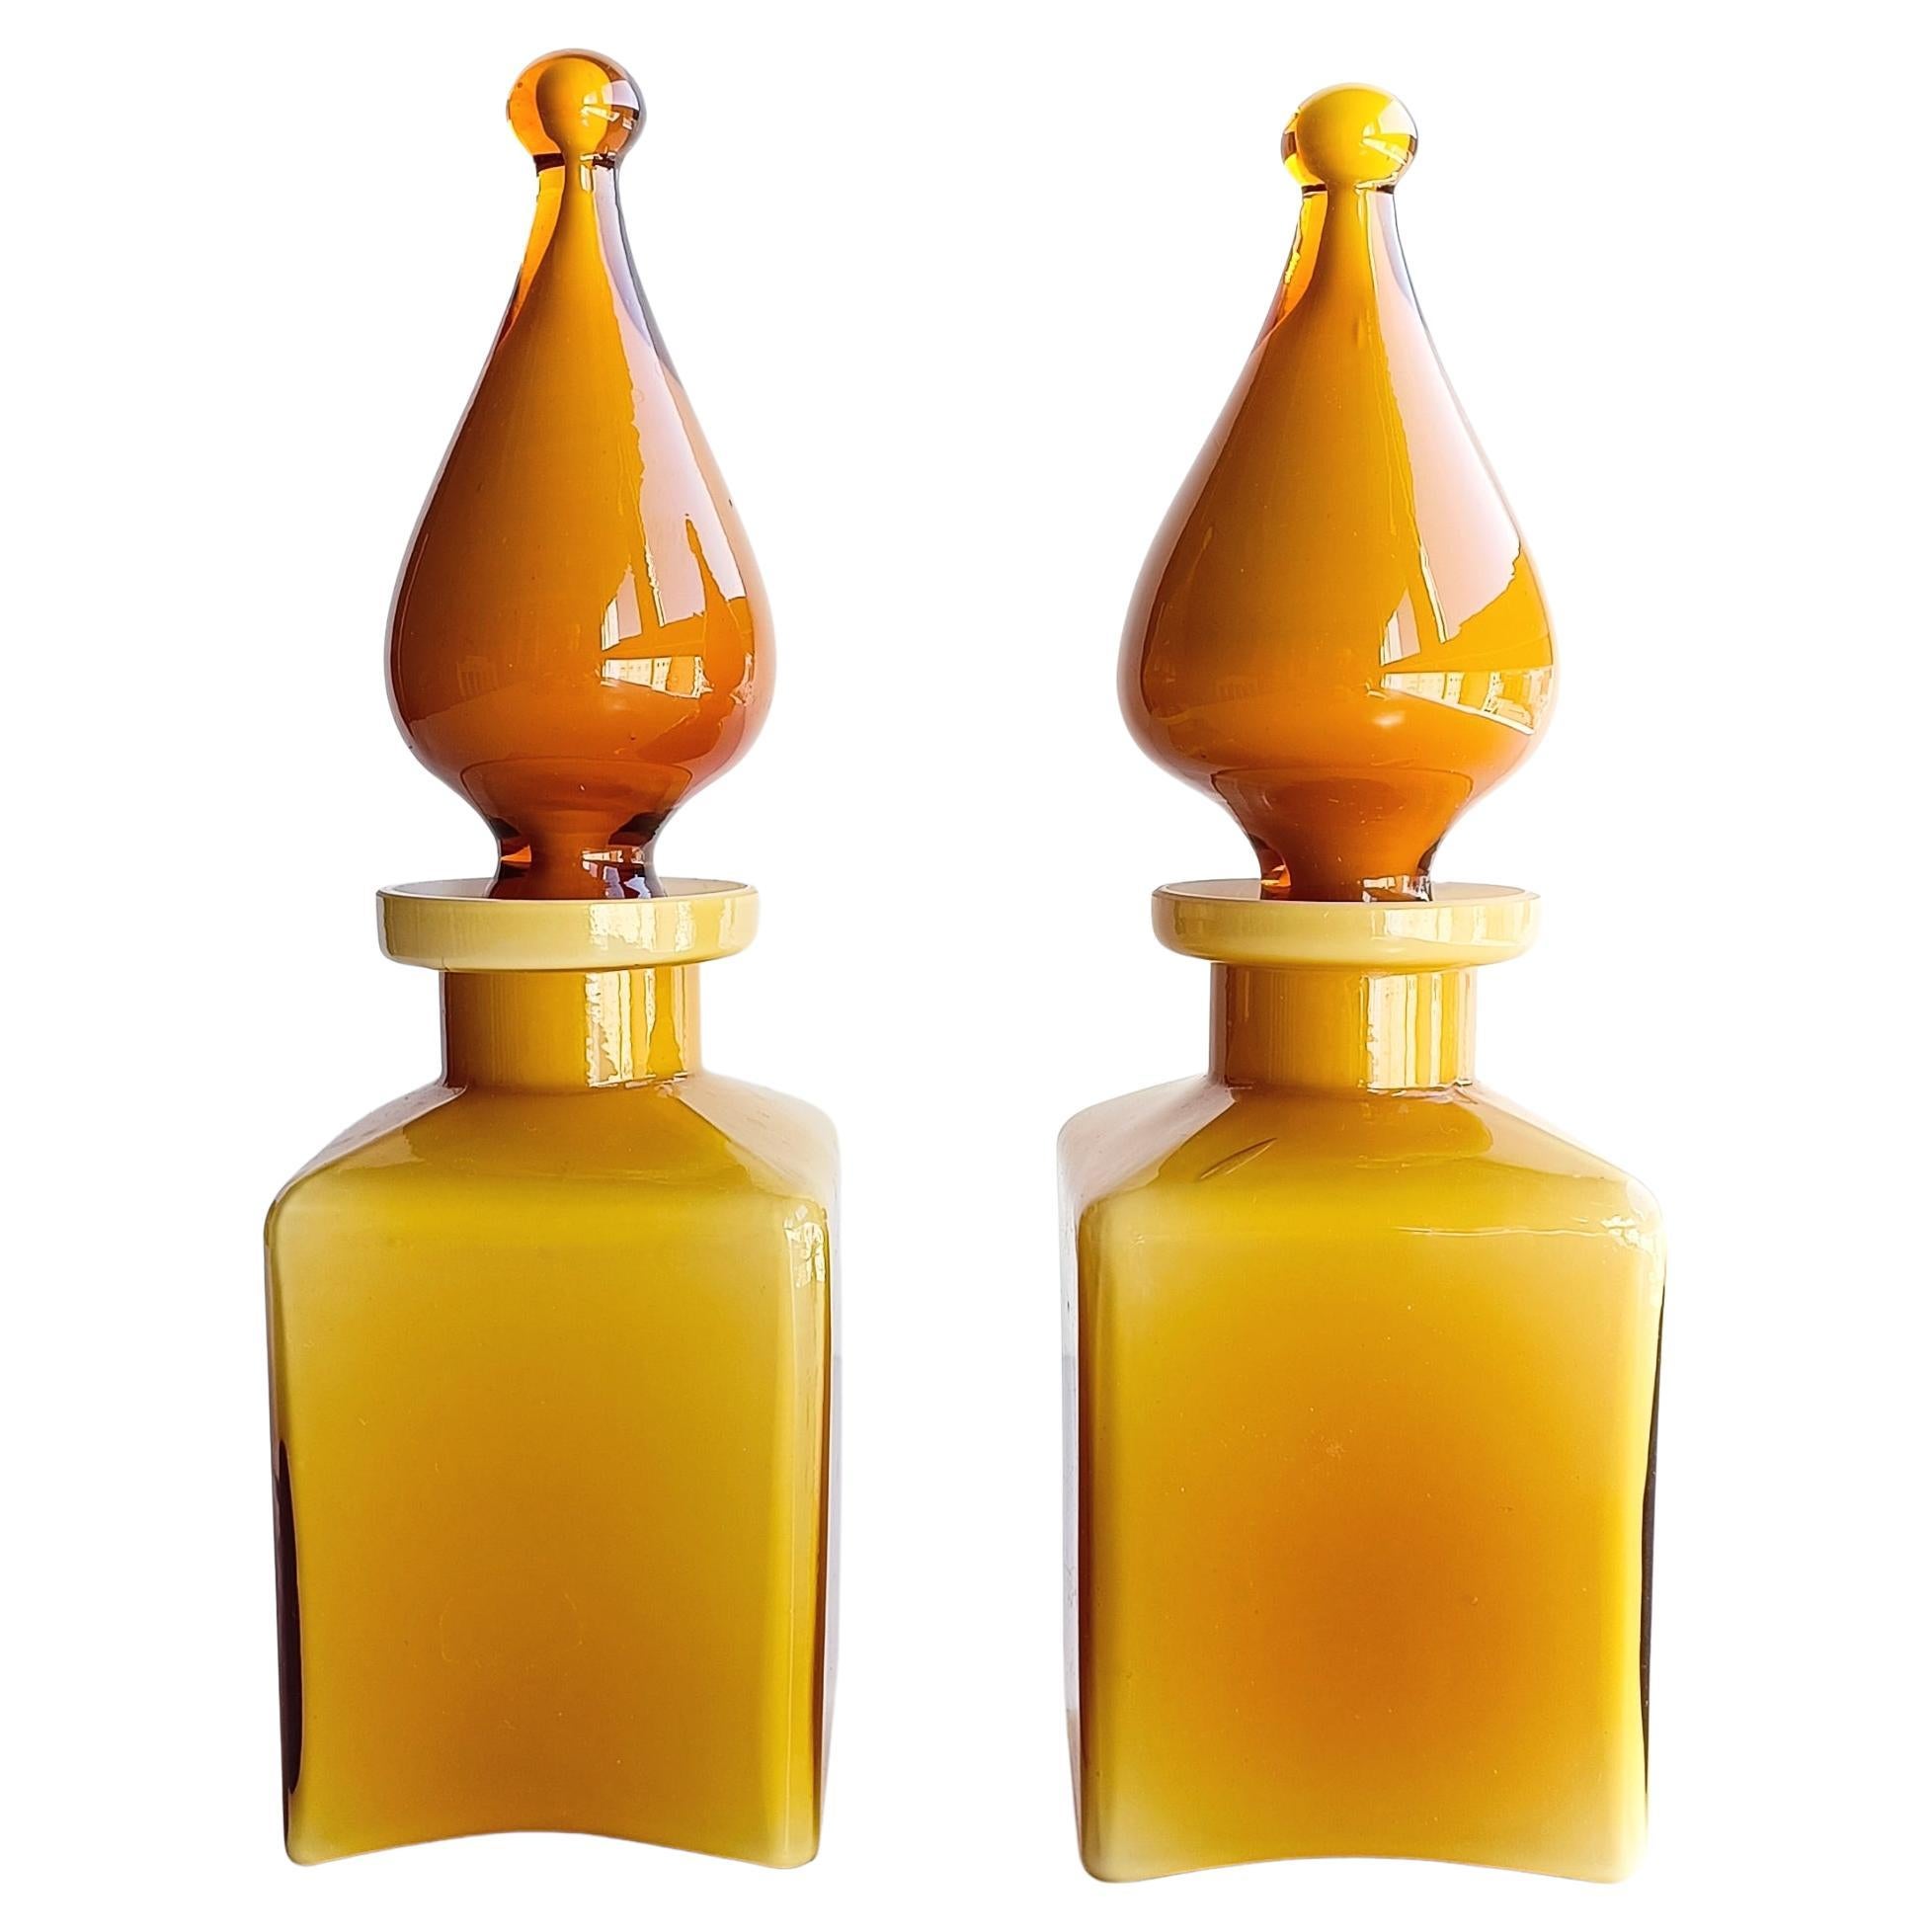 Delightful indeed, these unusual Empoli Glass pair of perfume genie bottles feature a beautiful amber color exterior layer of glass and a very thin white casing. The body of the bottle is very light, in contrast with the very heavy and solid genie